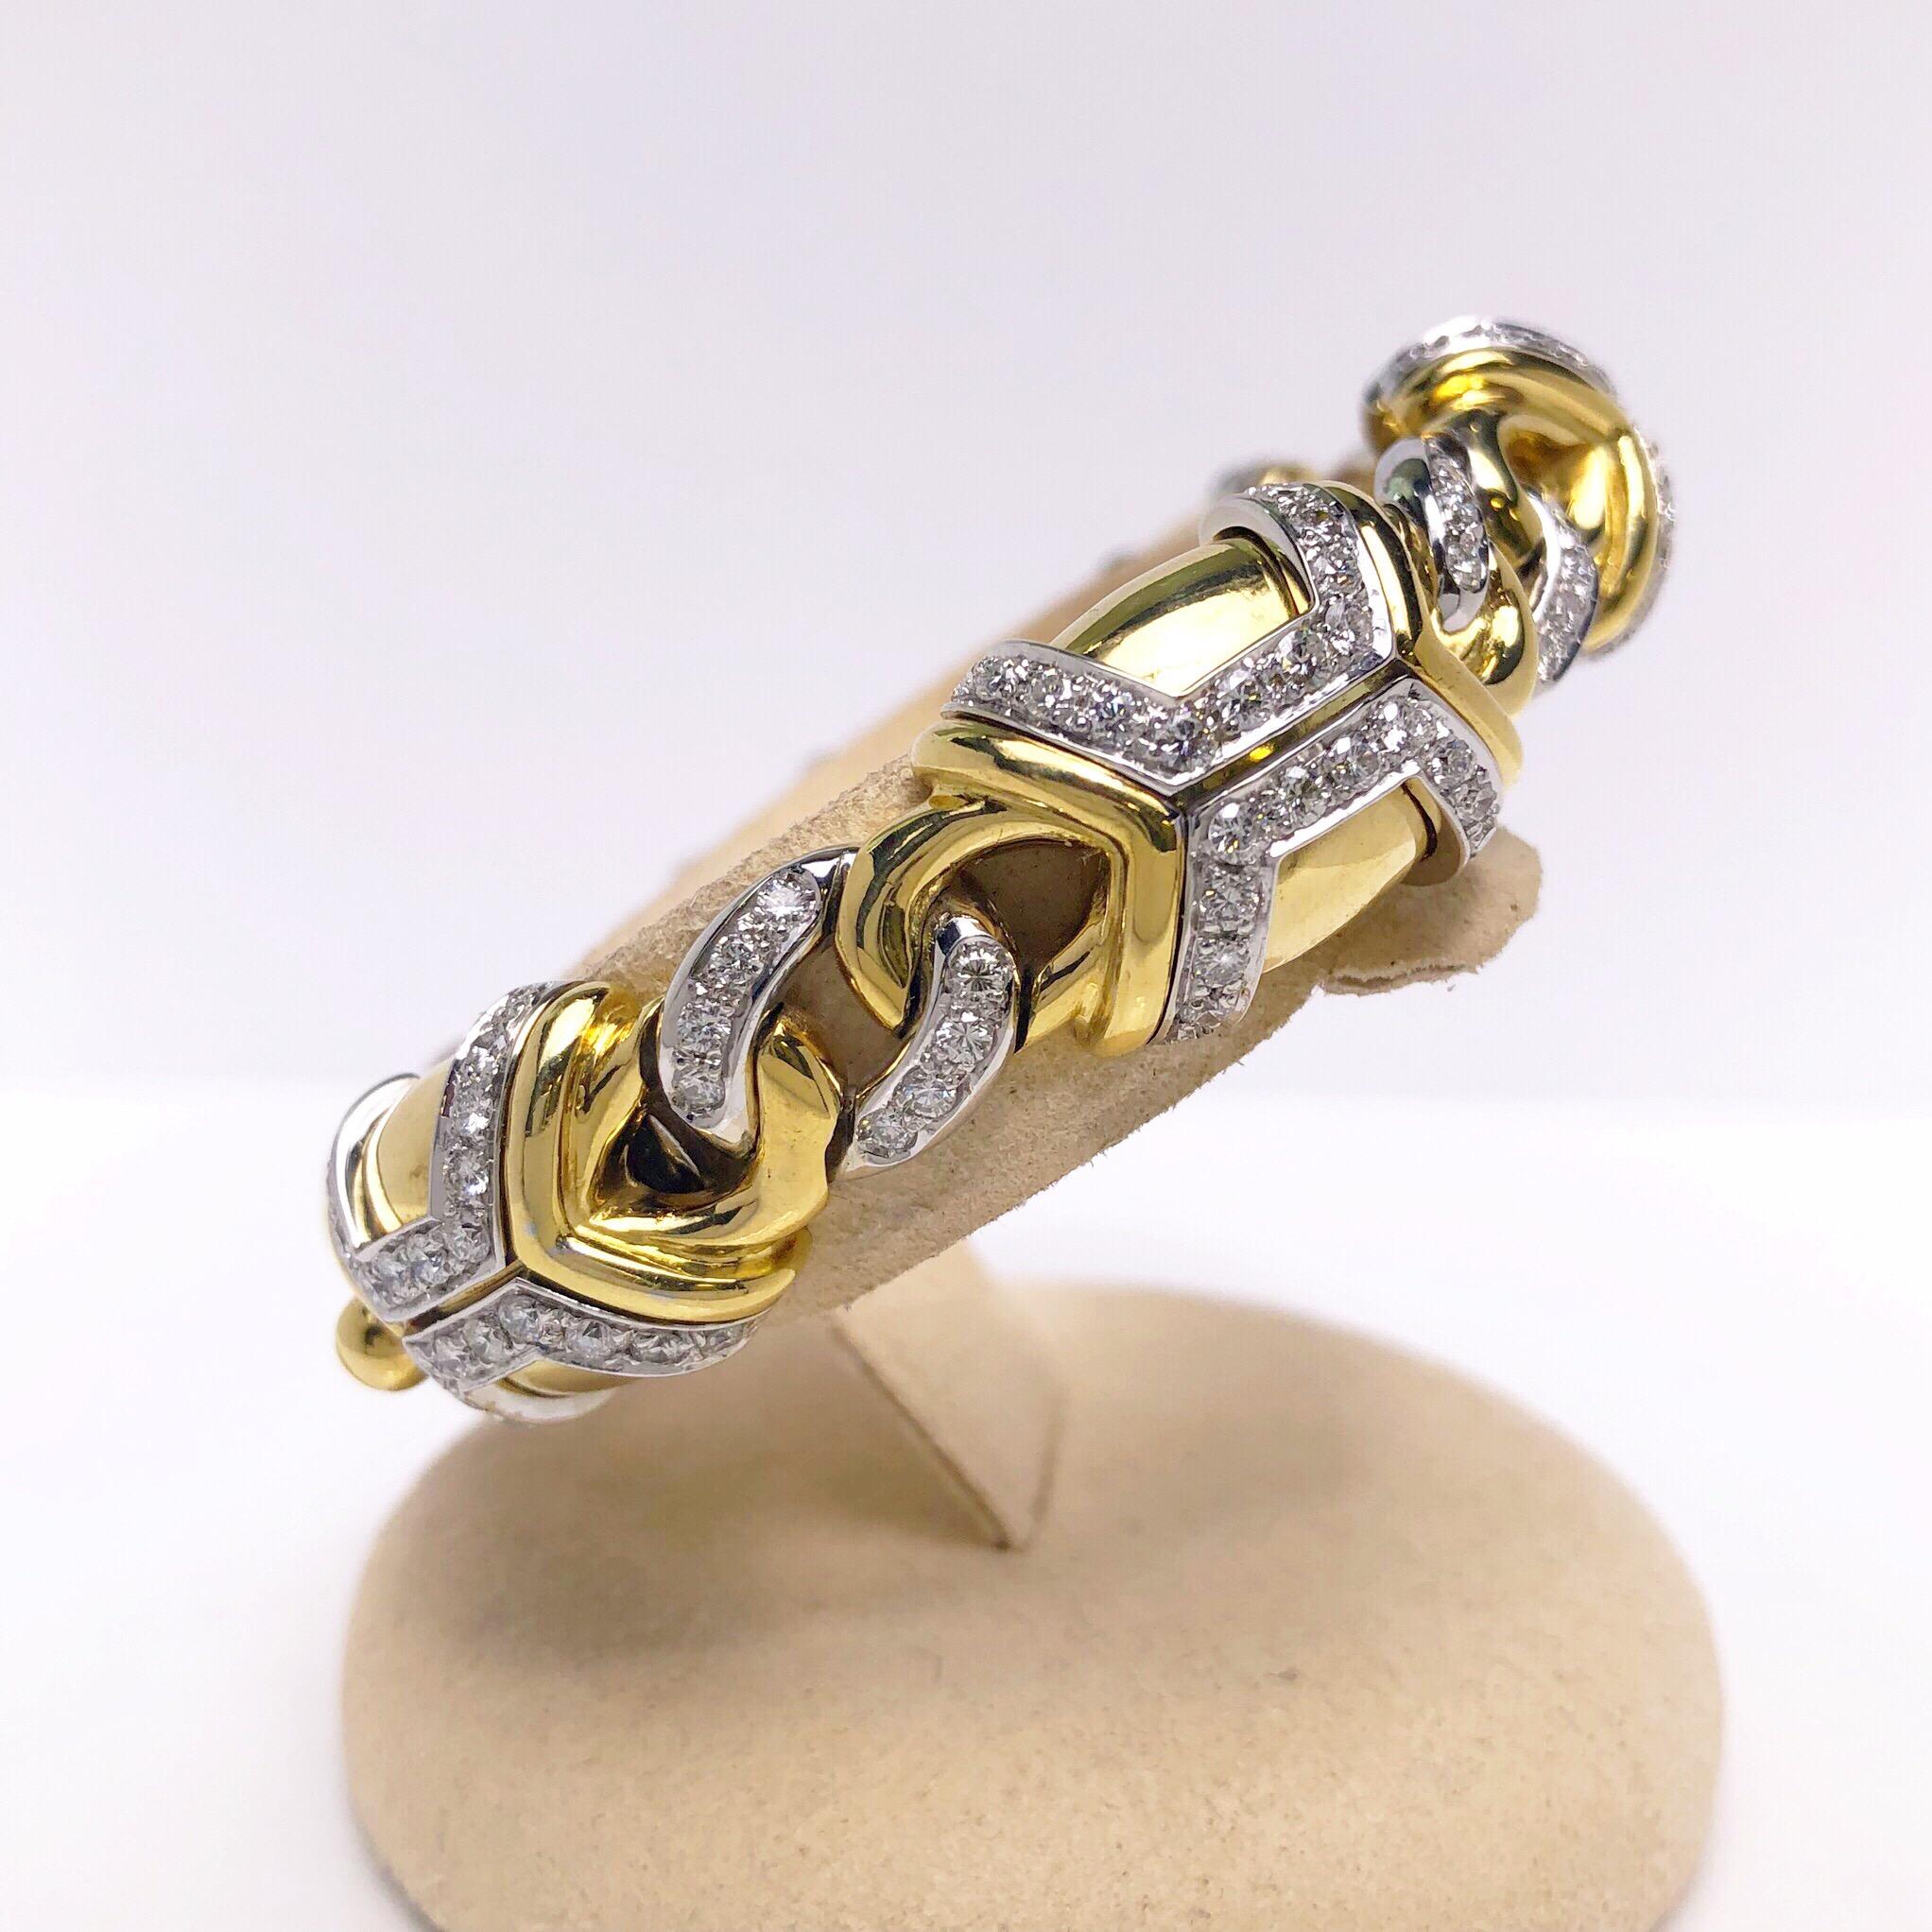 Made in Italy by Nino Verita, Six 18 karat high polished yellow gold oval sections create this beautiful chunky bracelet. Each section is accented with round brilliant diamonds set in 18 karat white gold and joined with a white gold and diamond